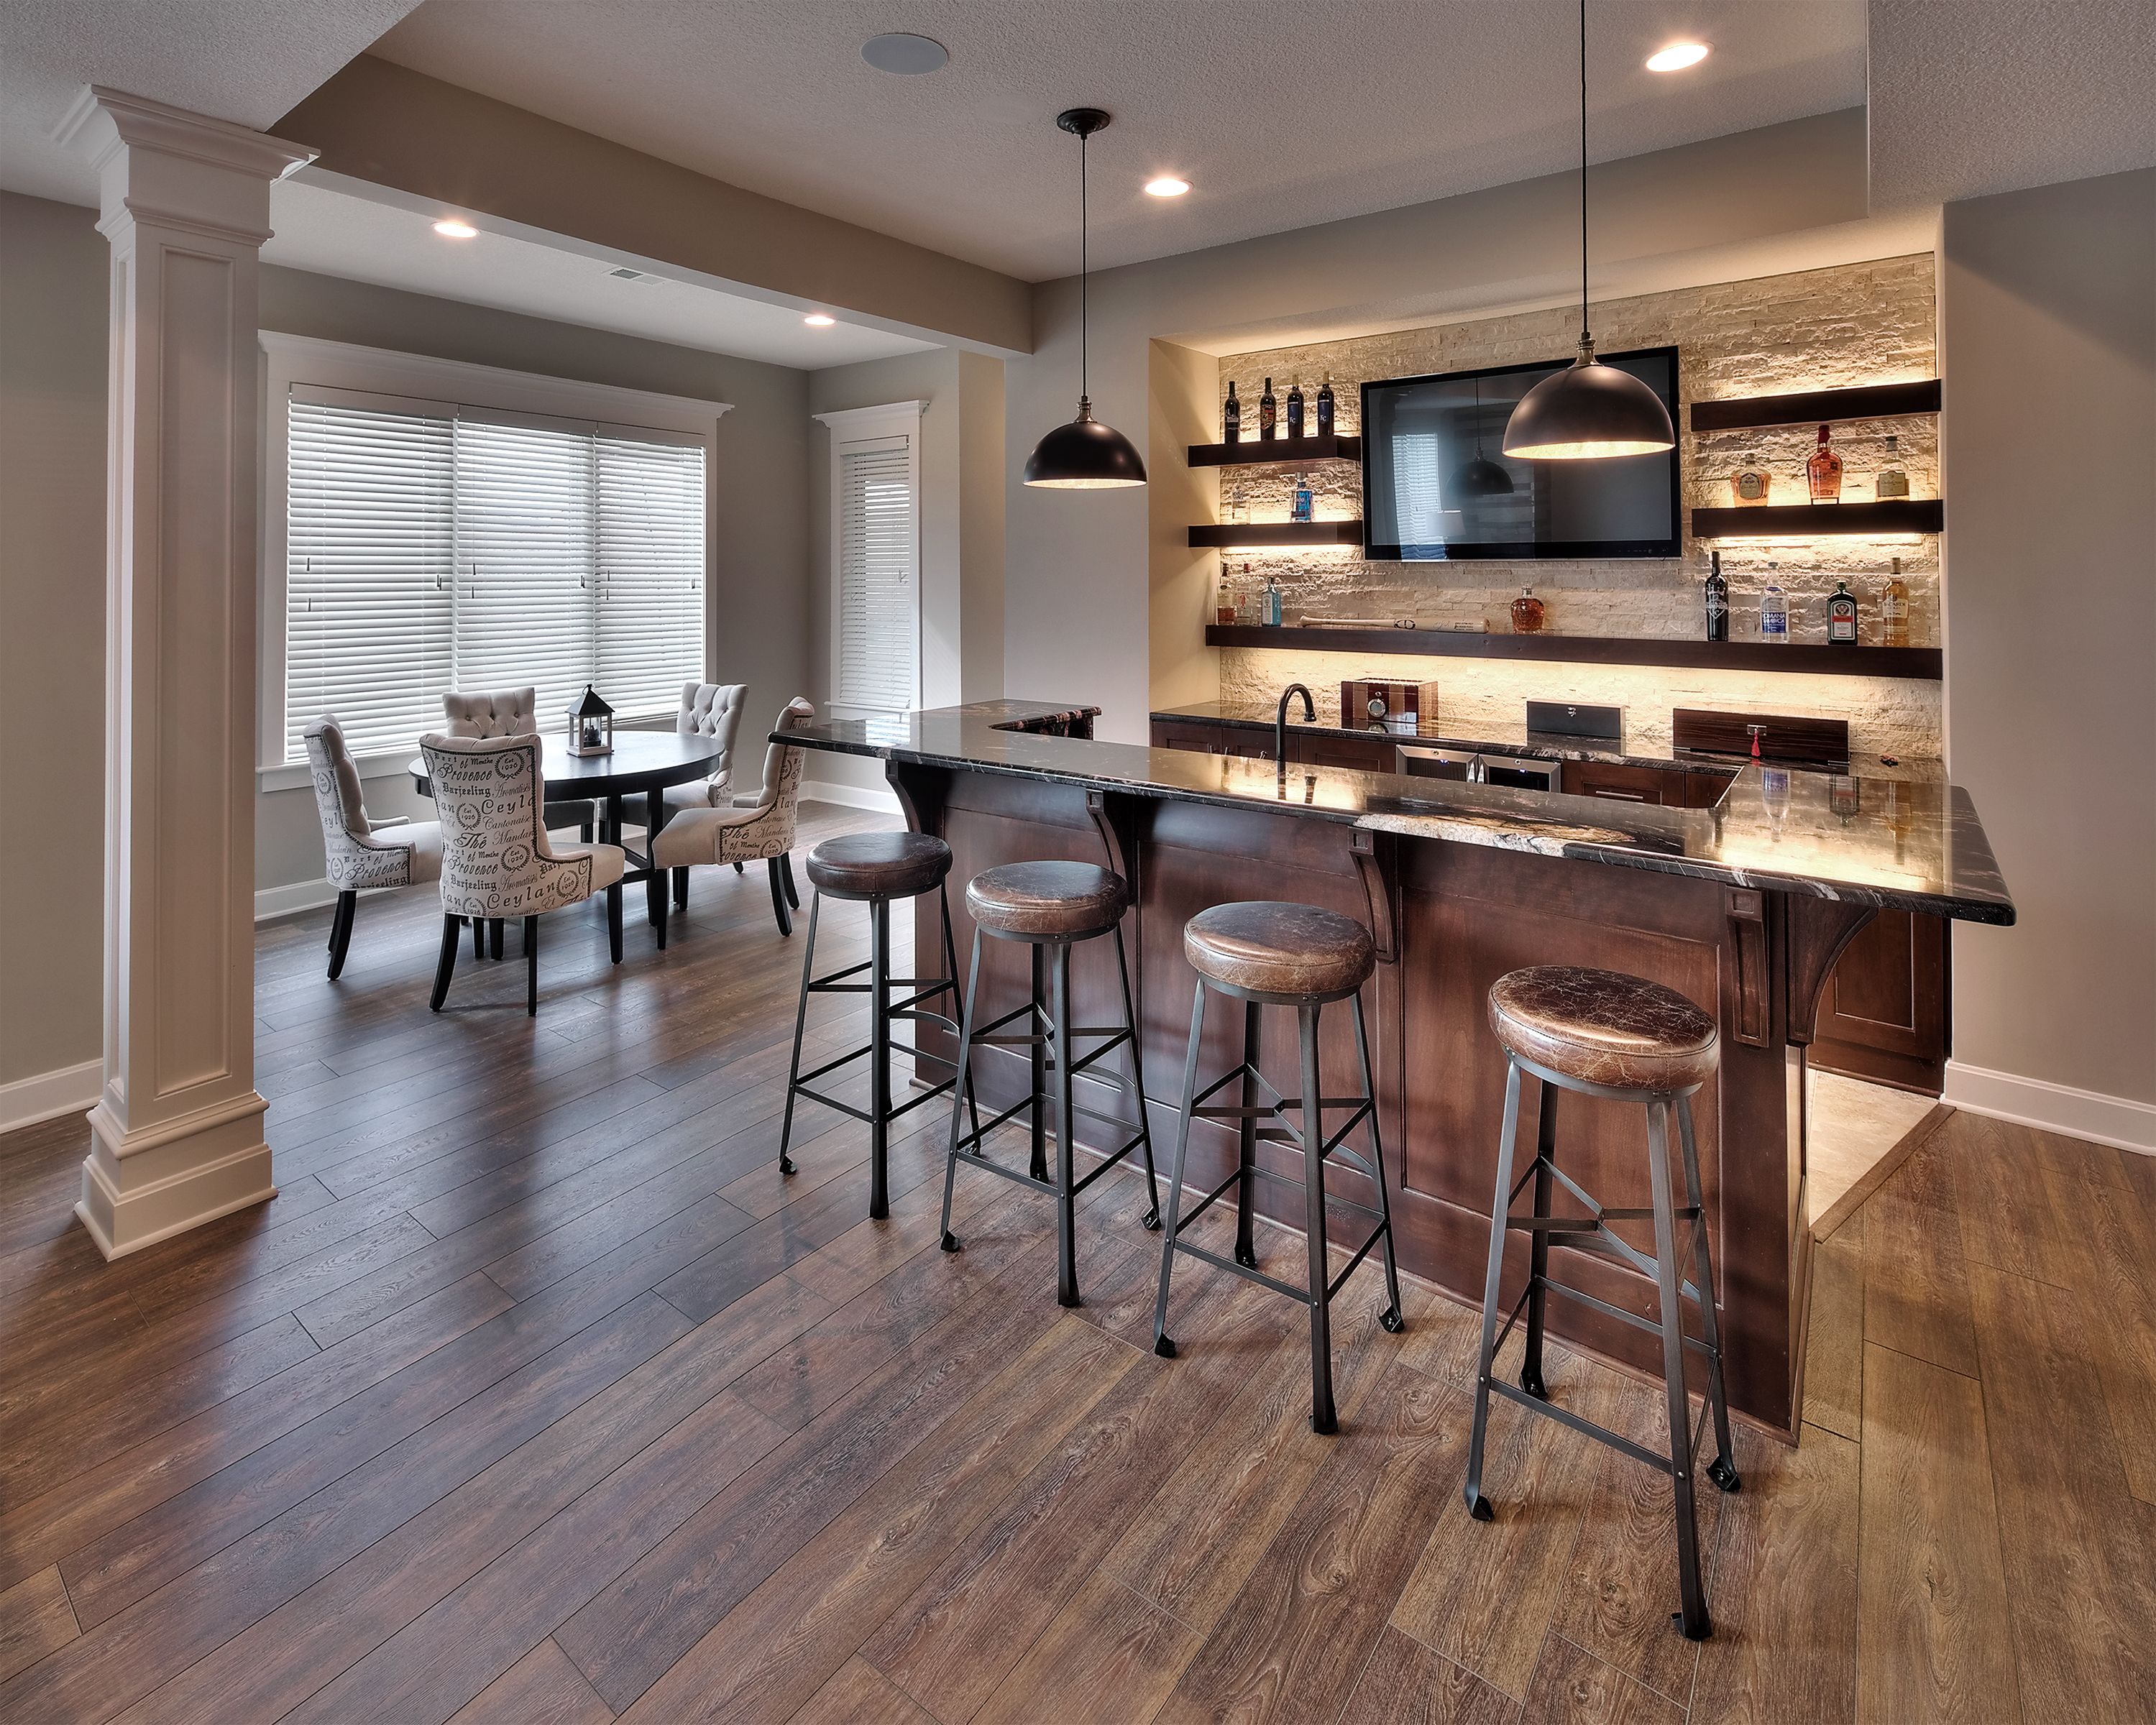 Basements And Bars: Tips For Setting Up A Home Tavern